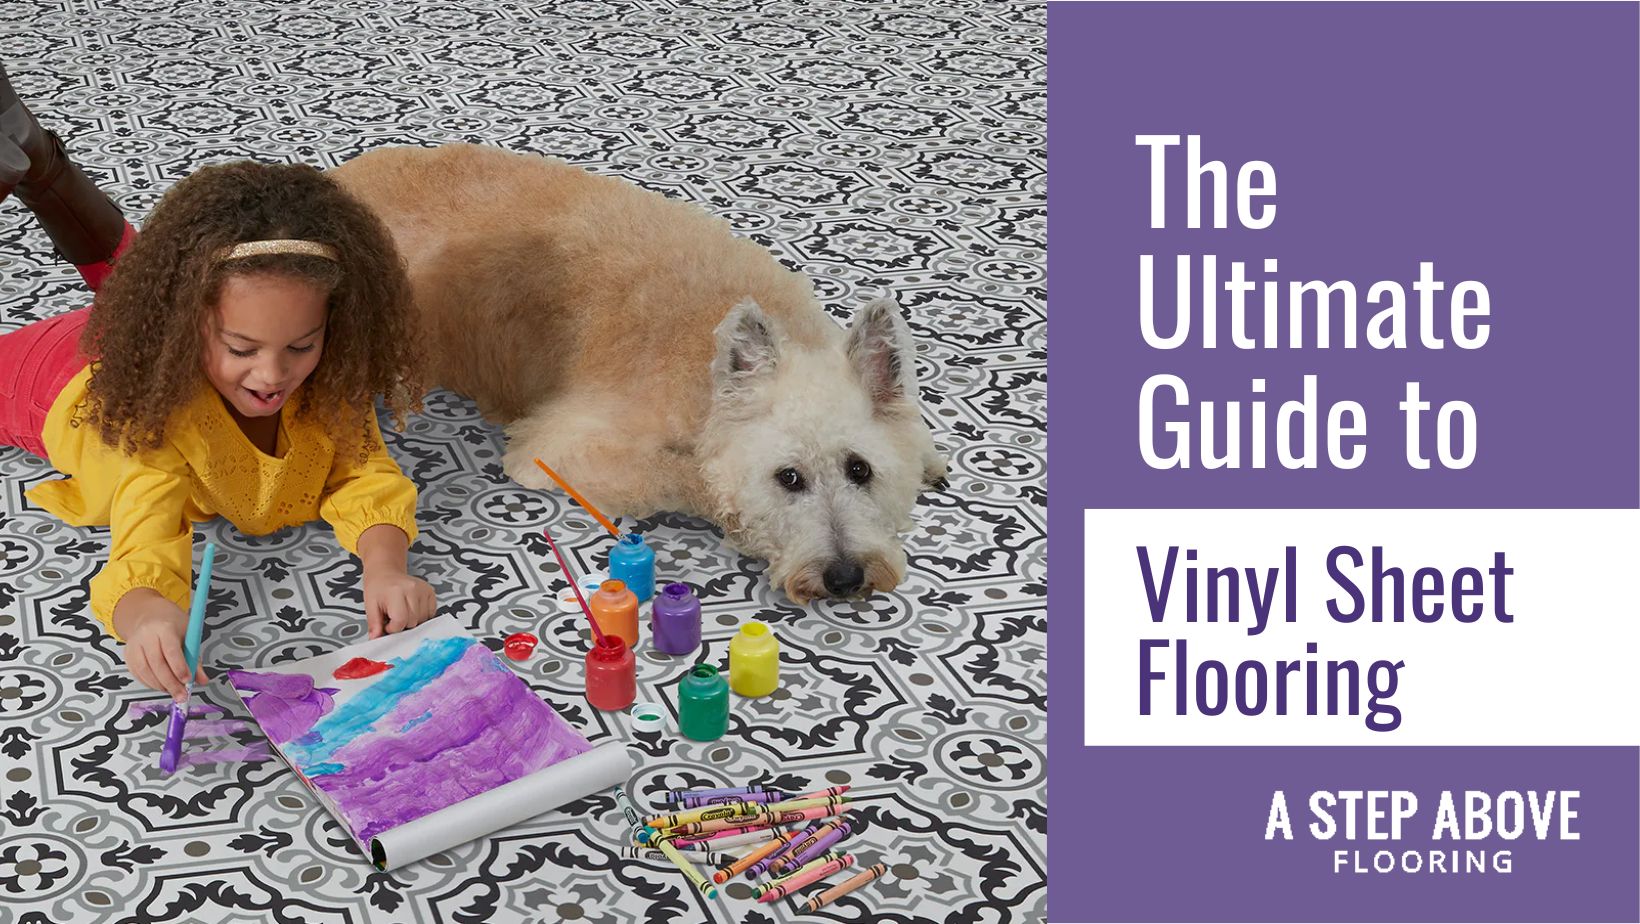 A little girl painting a picture while laying on the floor next to a dog